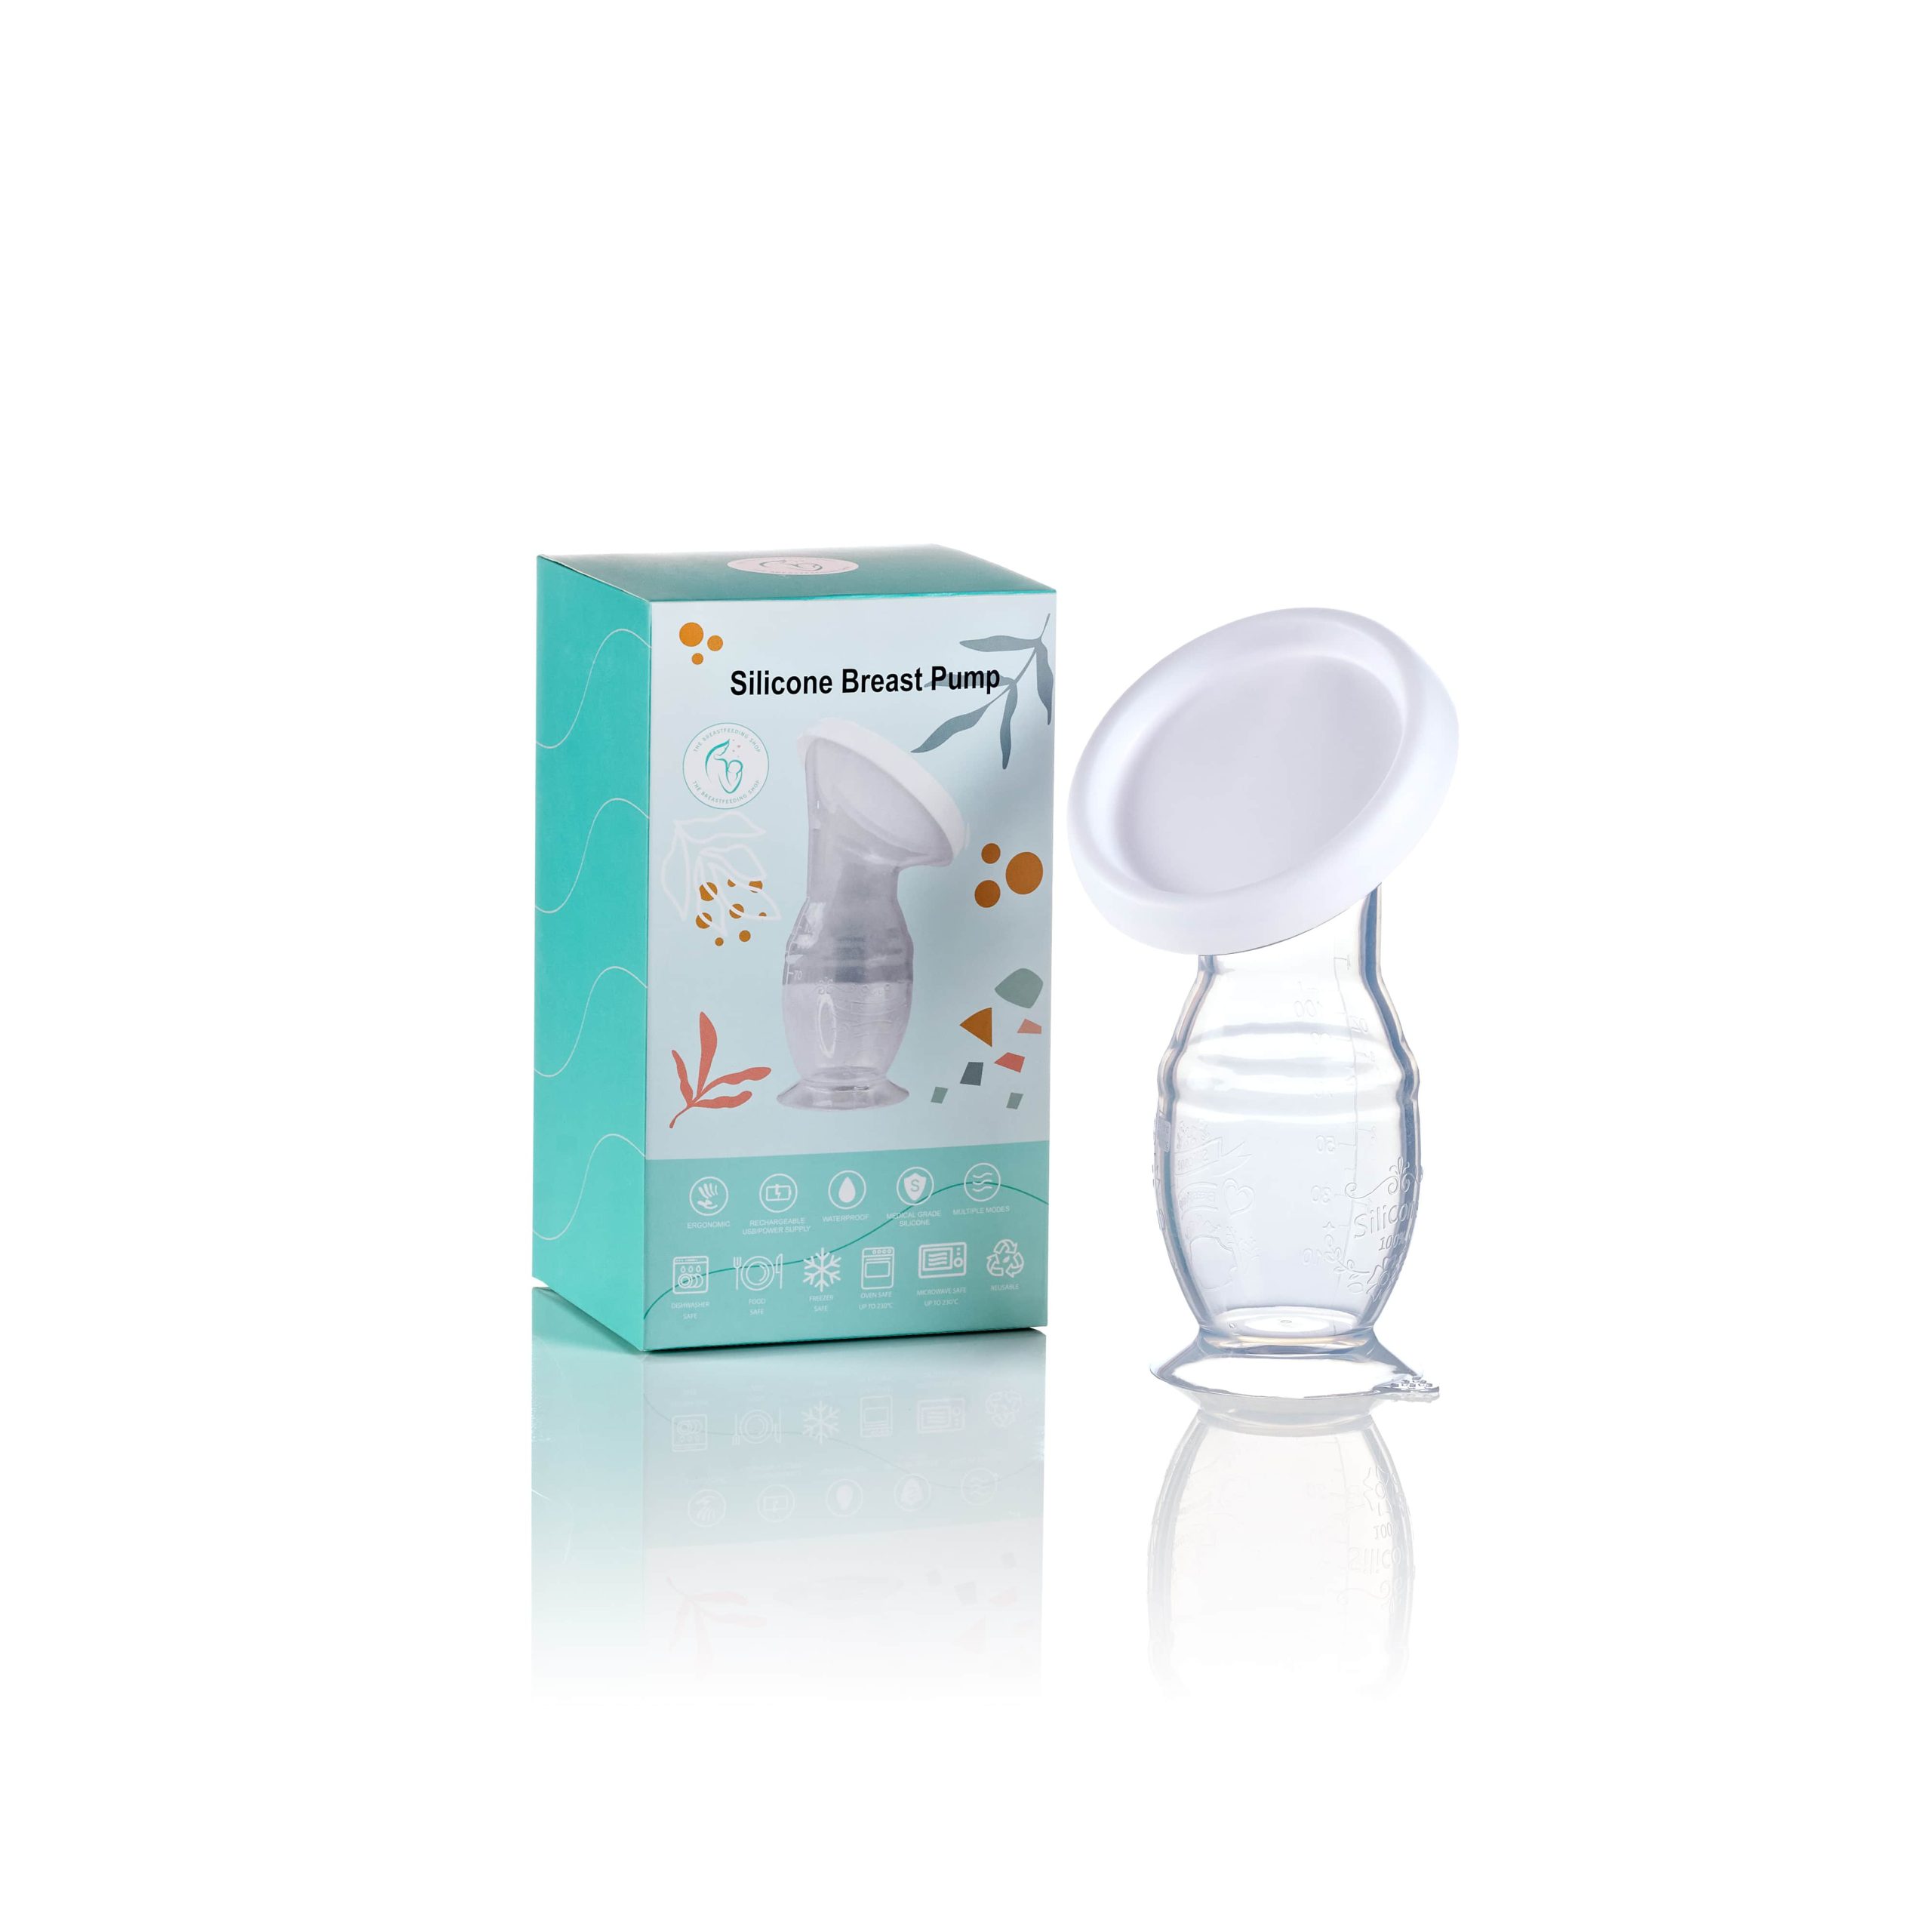 Momcozy S12 Pro Breast Pump- New in Box - baby & kid stuff - by